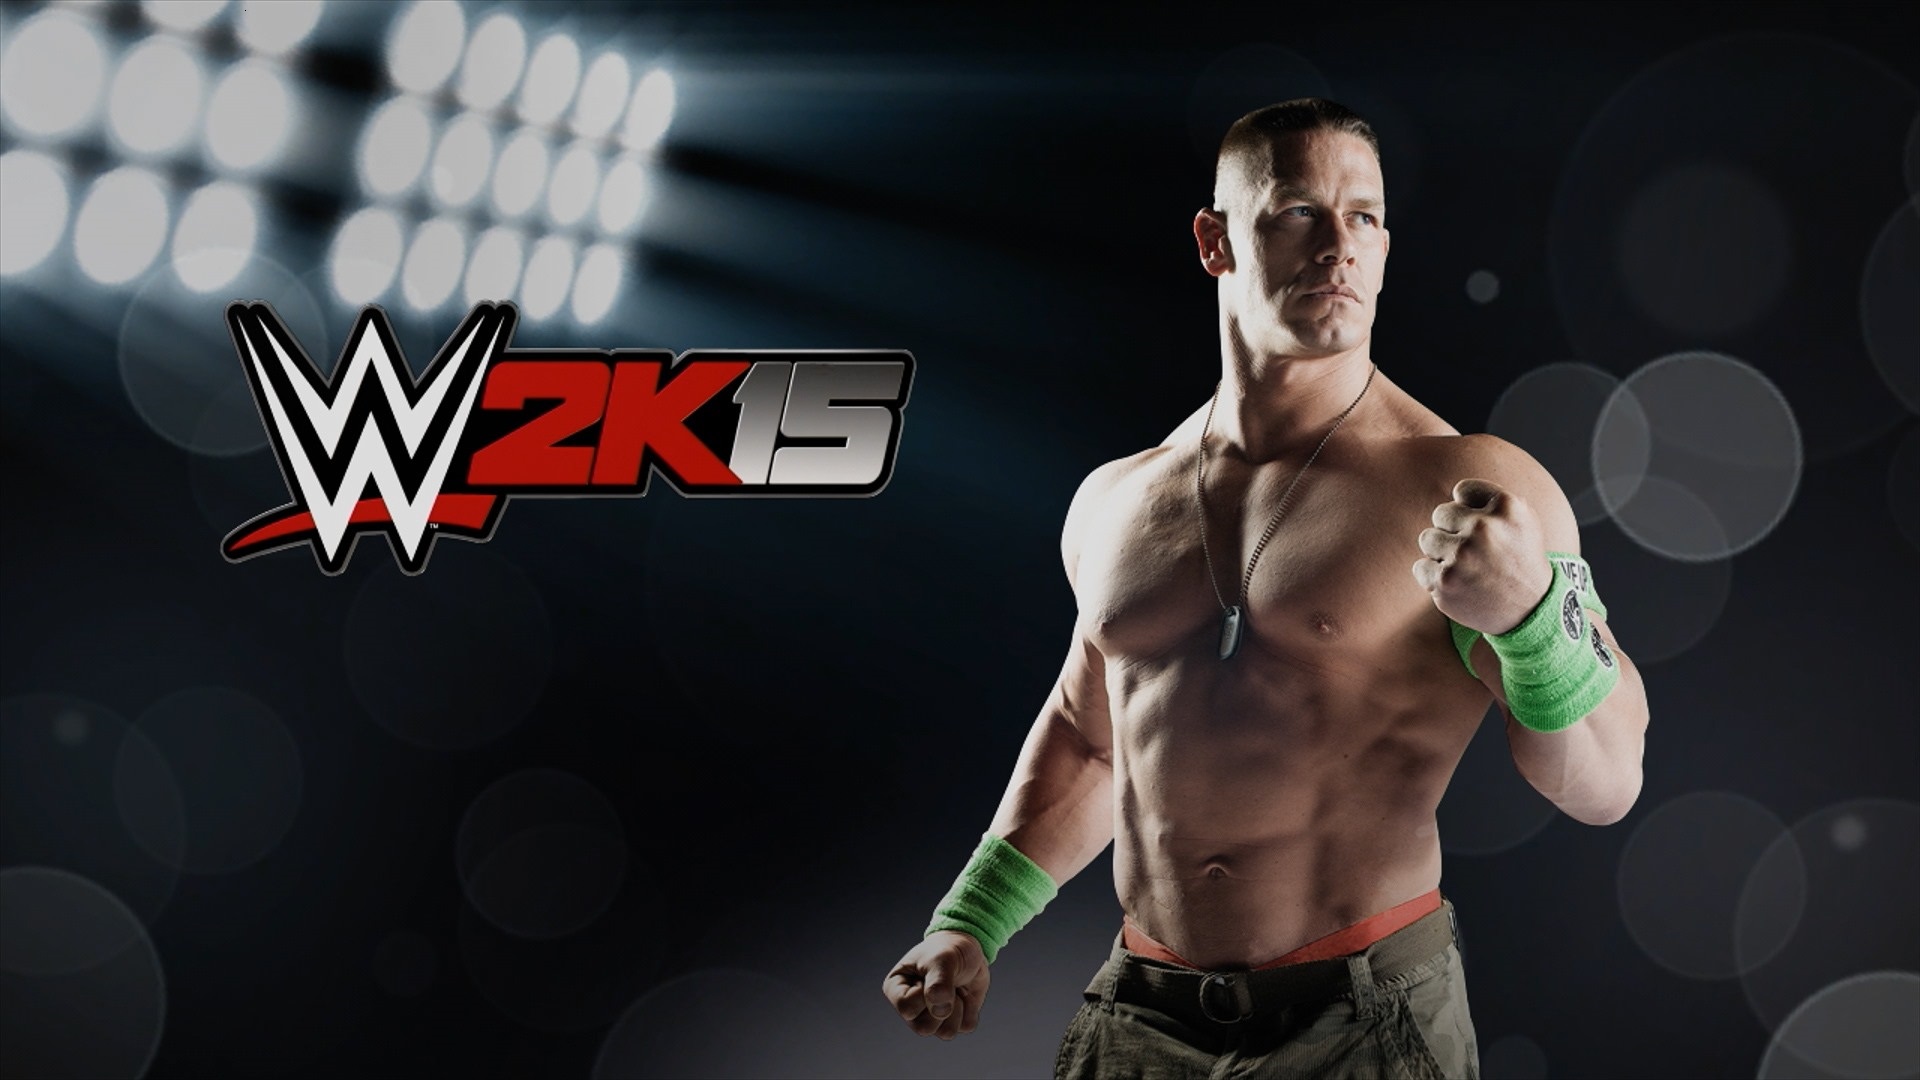 Wwe 2k13 Pc Game Free Download Full Version Highly Compressed